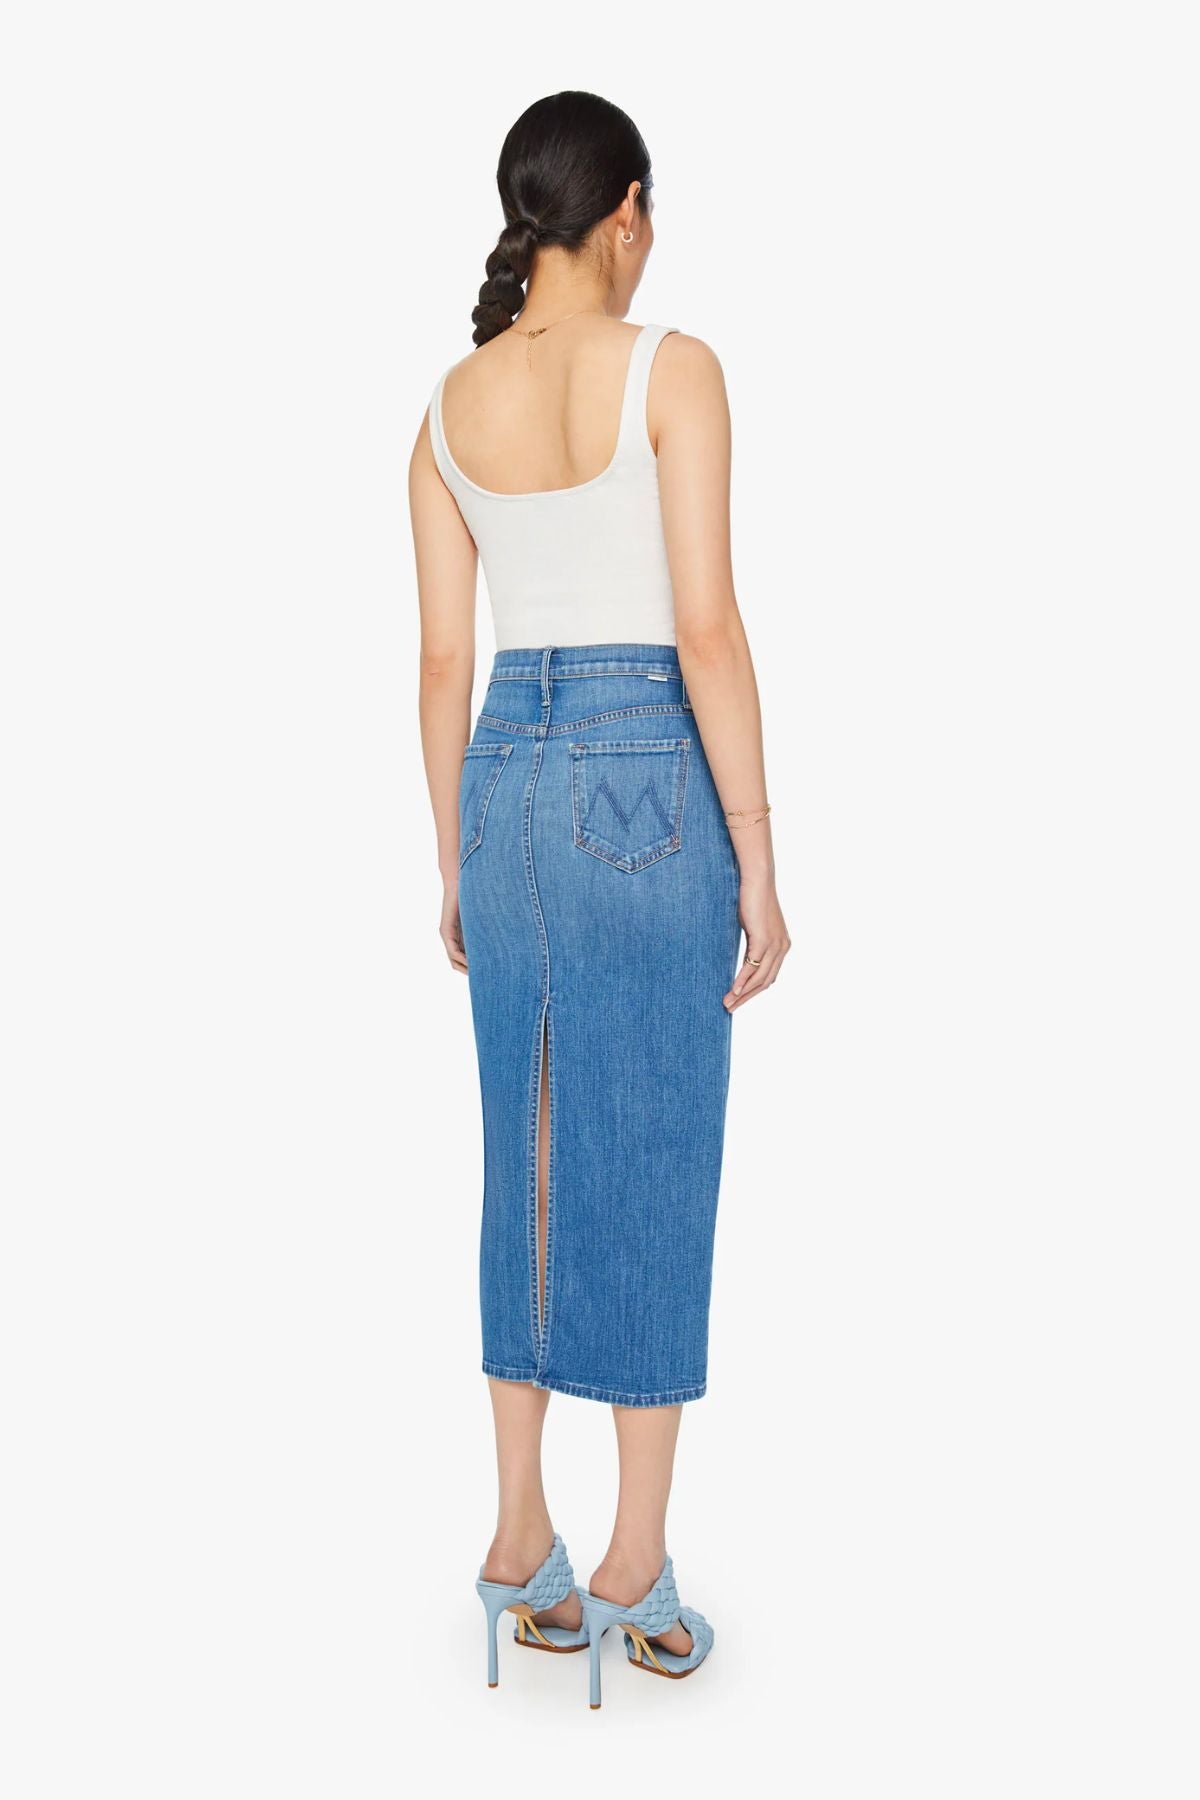 Mother Denim The Pencil Pusher Skirt - New Sheriff In Town